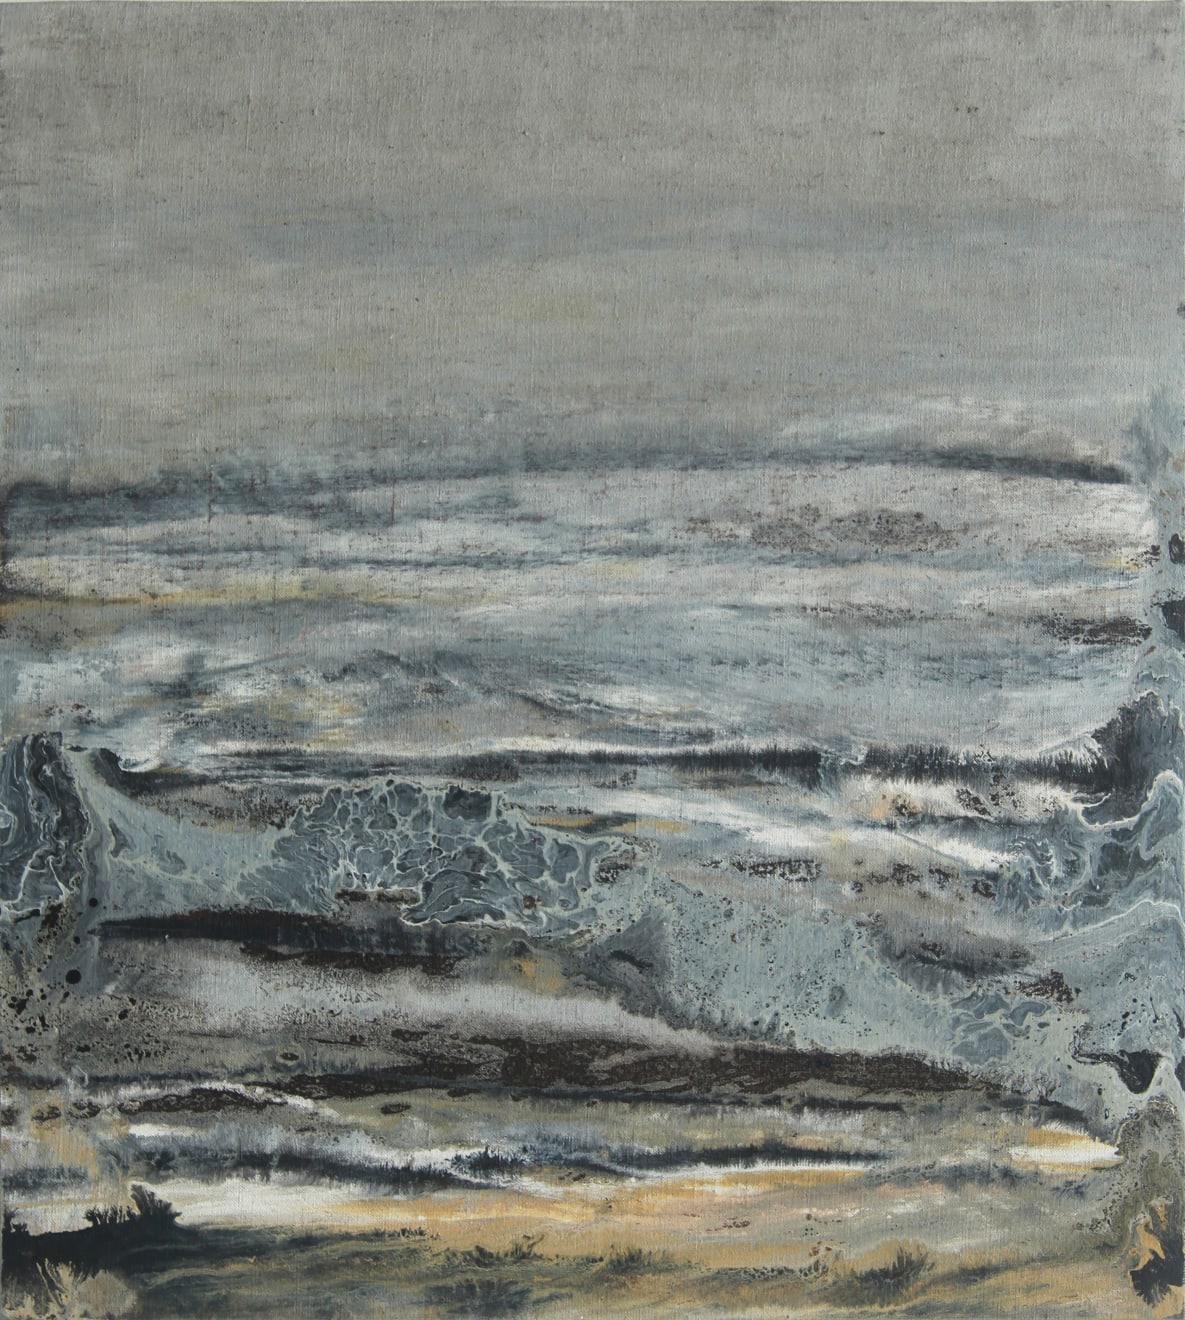 Estuary 06 Oil and Acrylic on Linen Mounted Board 53 x 63.5cm AUD $1400 SOLD